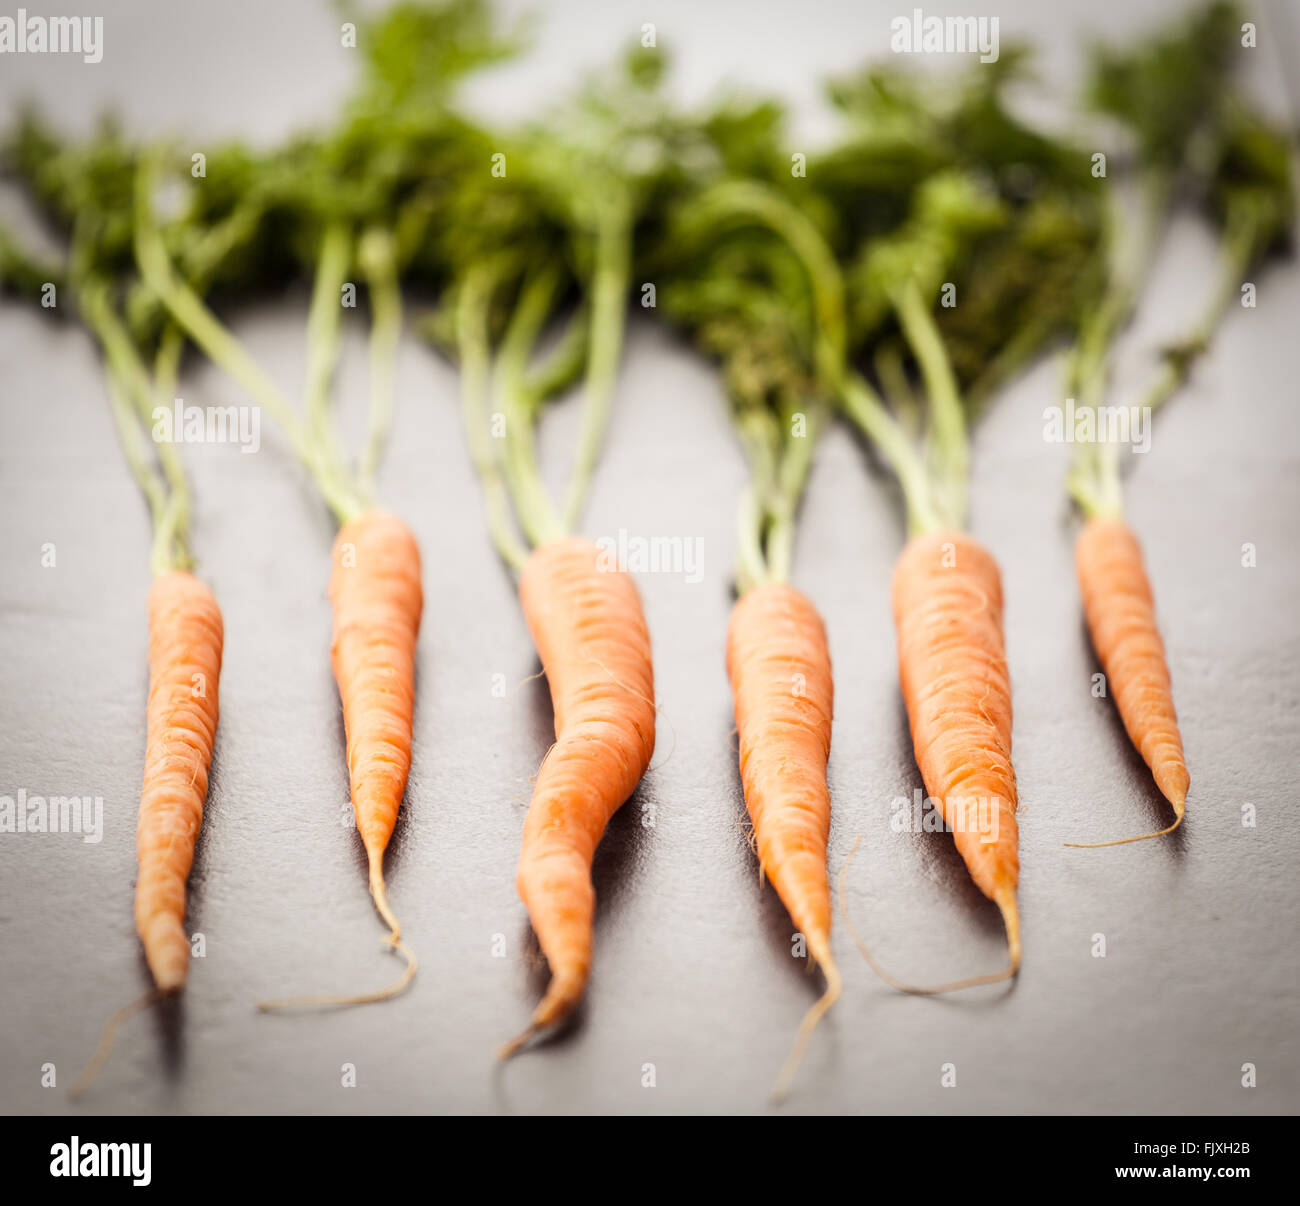 Six Dutch sweet carrots on bright textured stone background. Shallow depth of field. Stock Photo